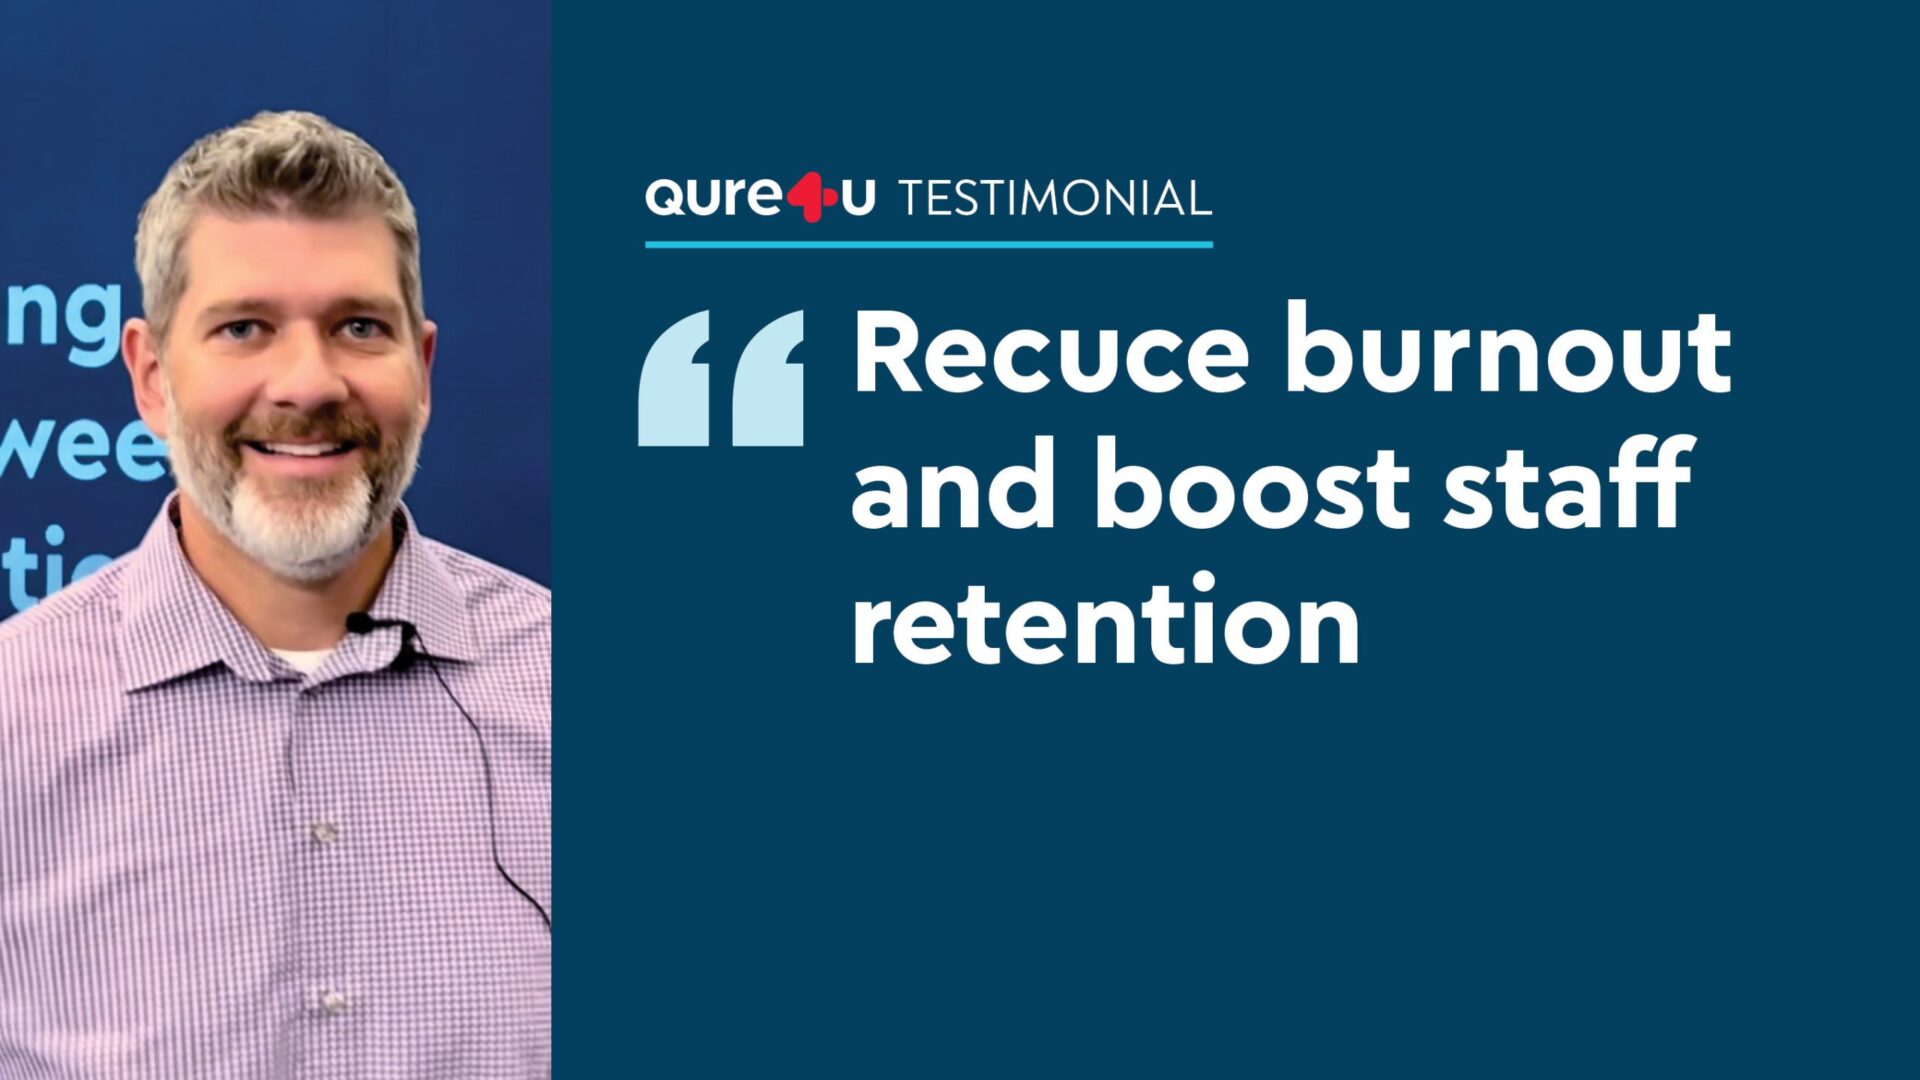 Testimonial: Reduce burnout and boost staff retention